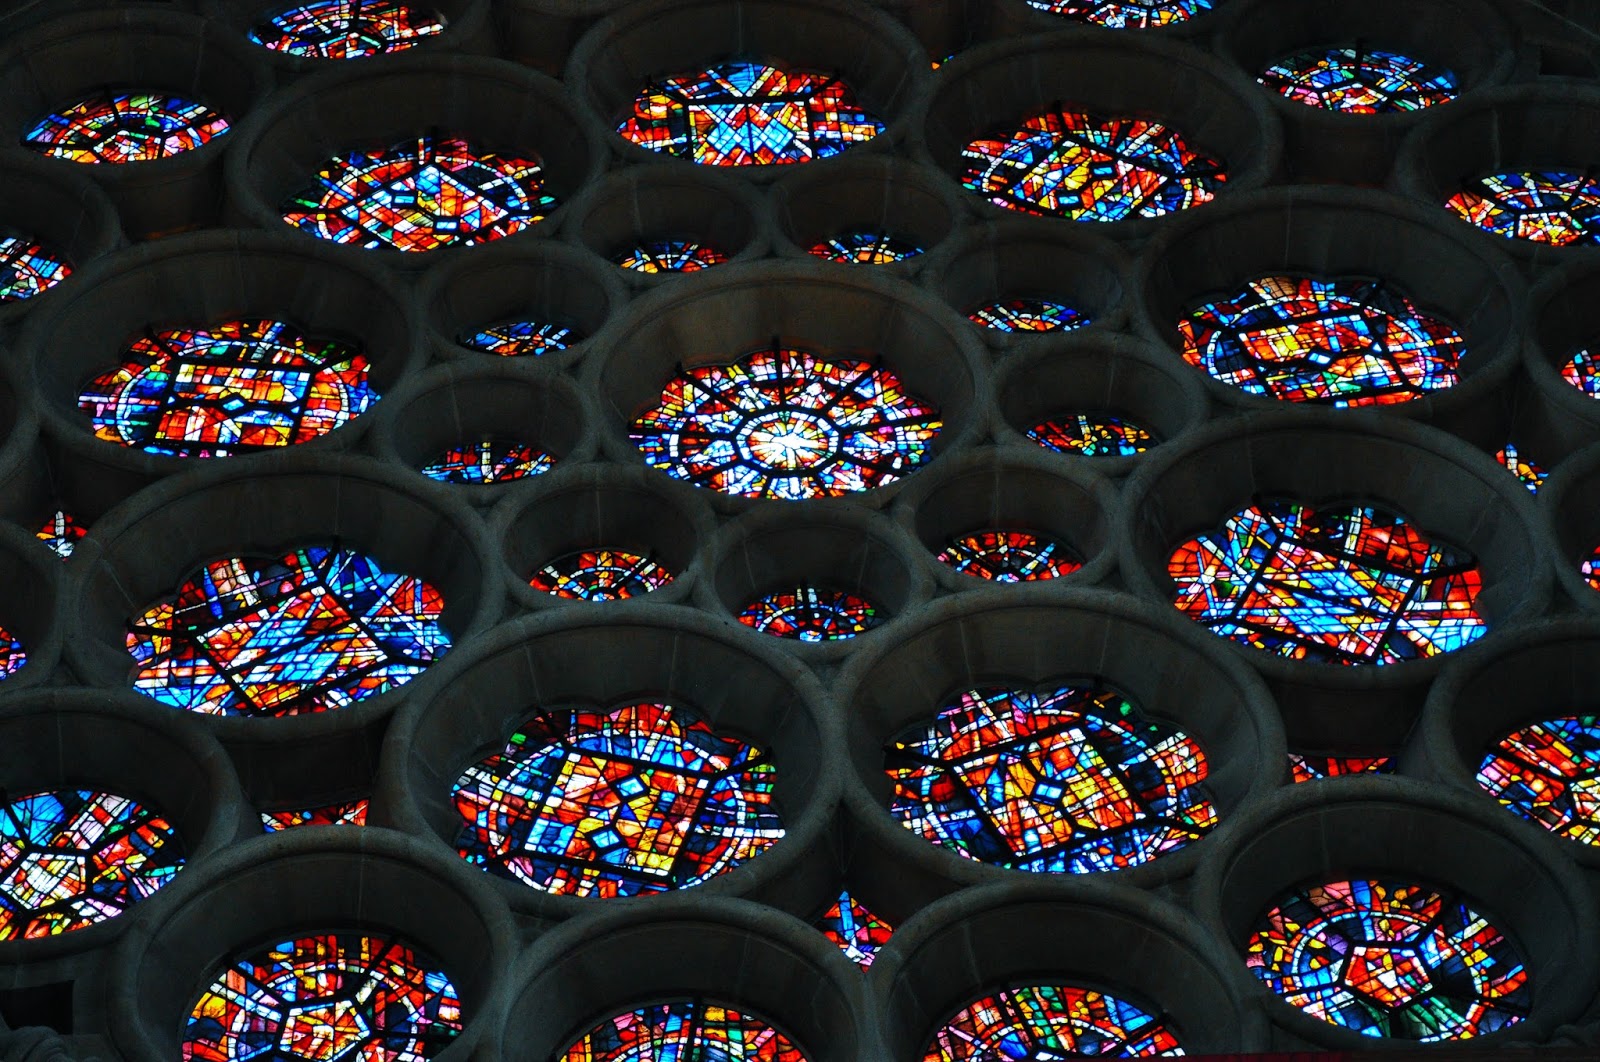 Close-up of the stained glass rosette, St. Albans Cathedral, St. Albans, Herts, England